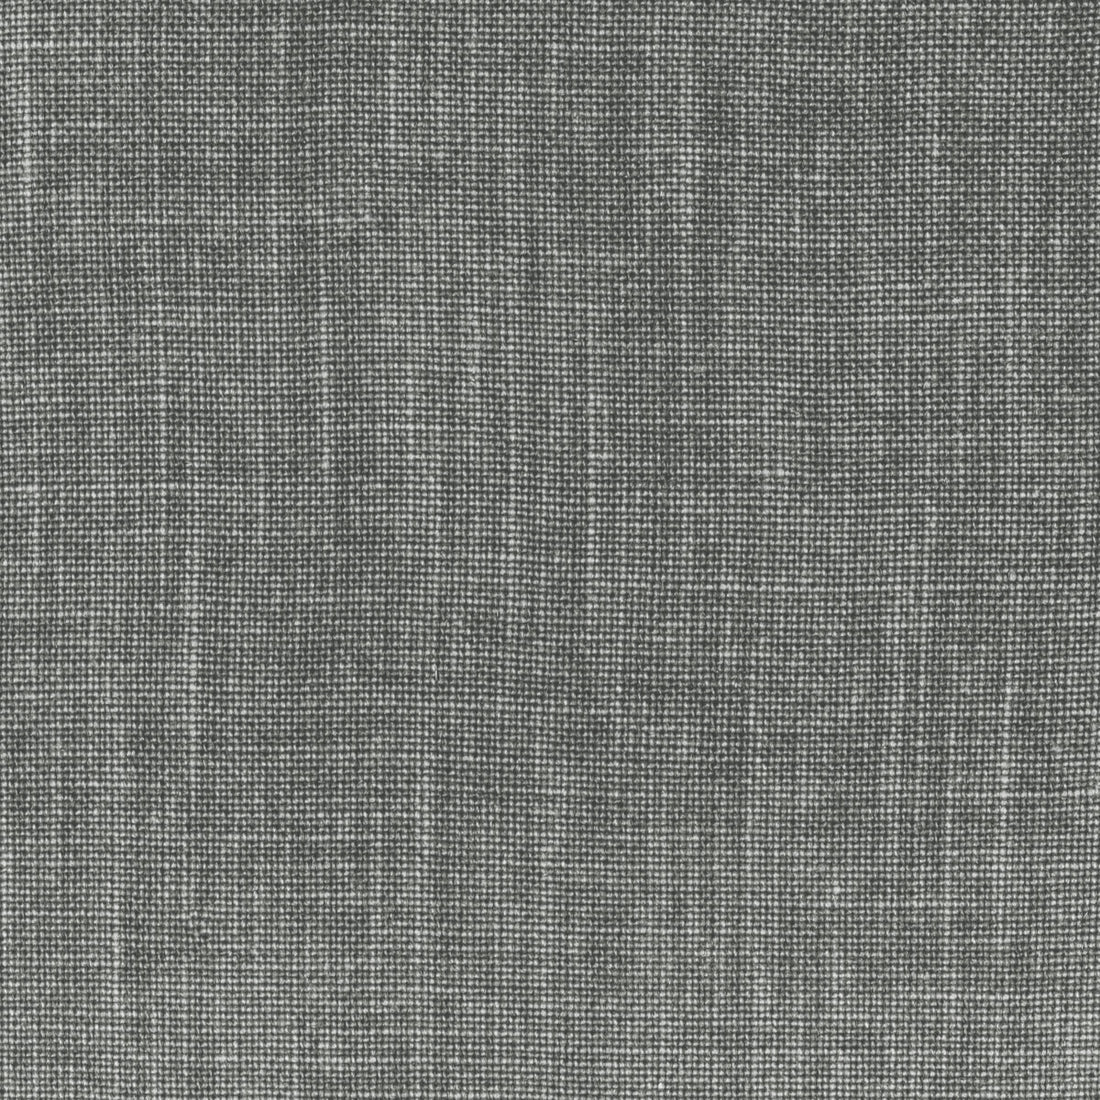 Kath fabric in granite color - pattern 35978.11.0 - by Kravet Design in the Barry Lantz Canvas To Cloth collection